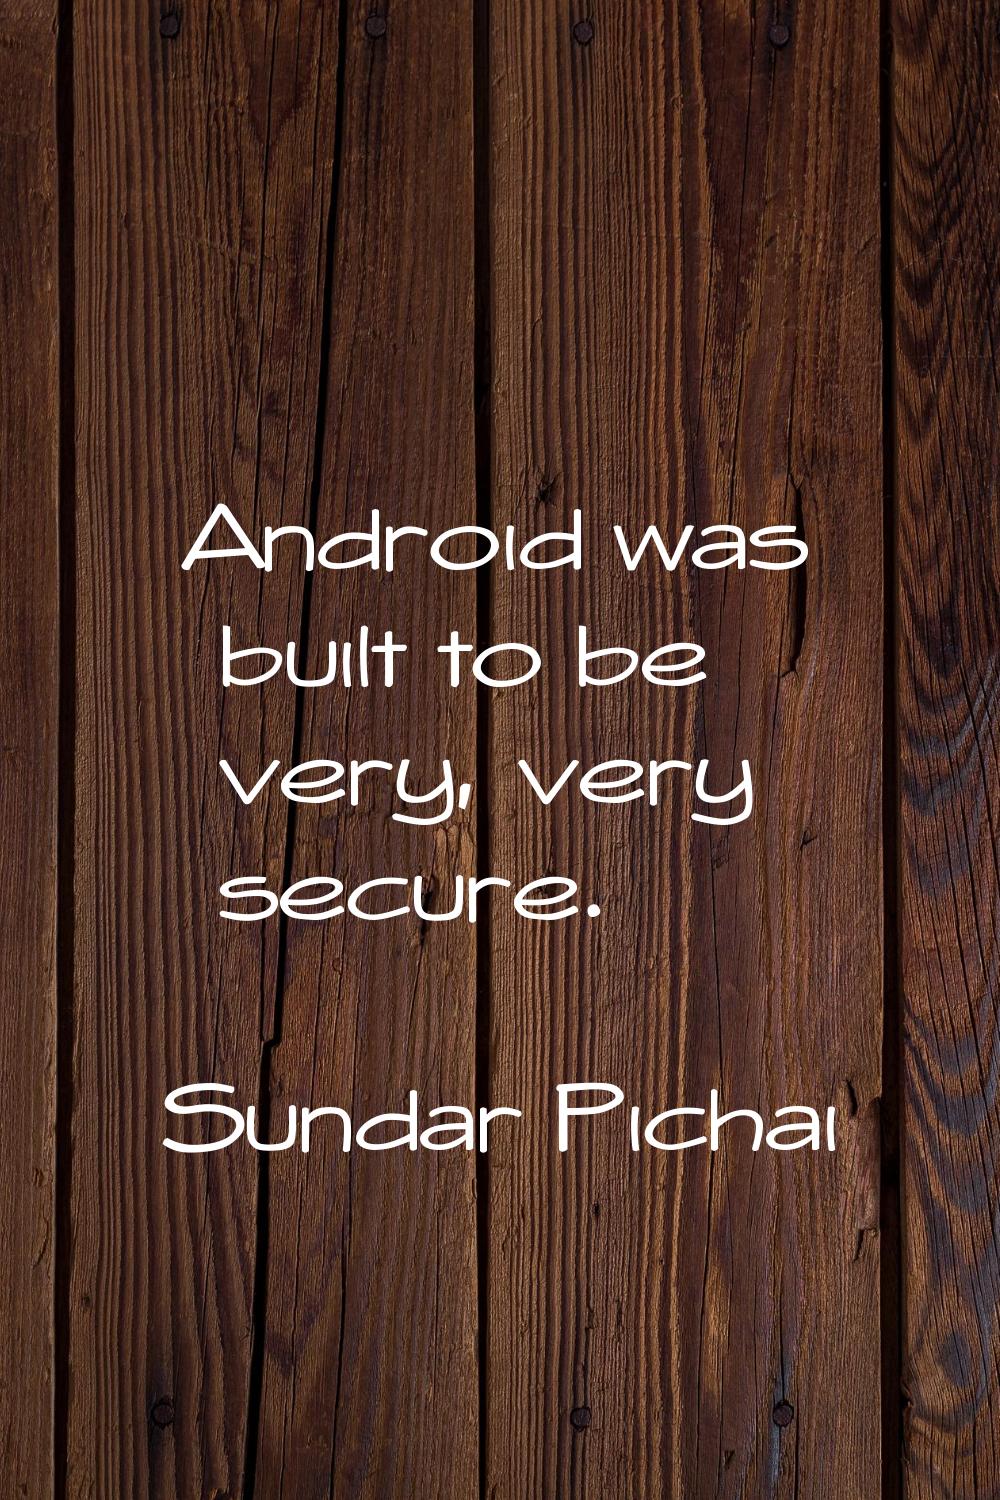 Android was built to be very, very secure.